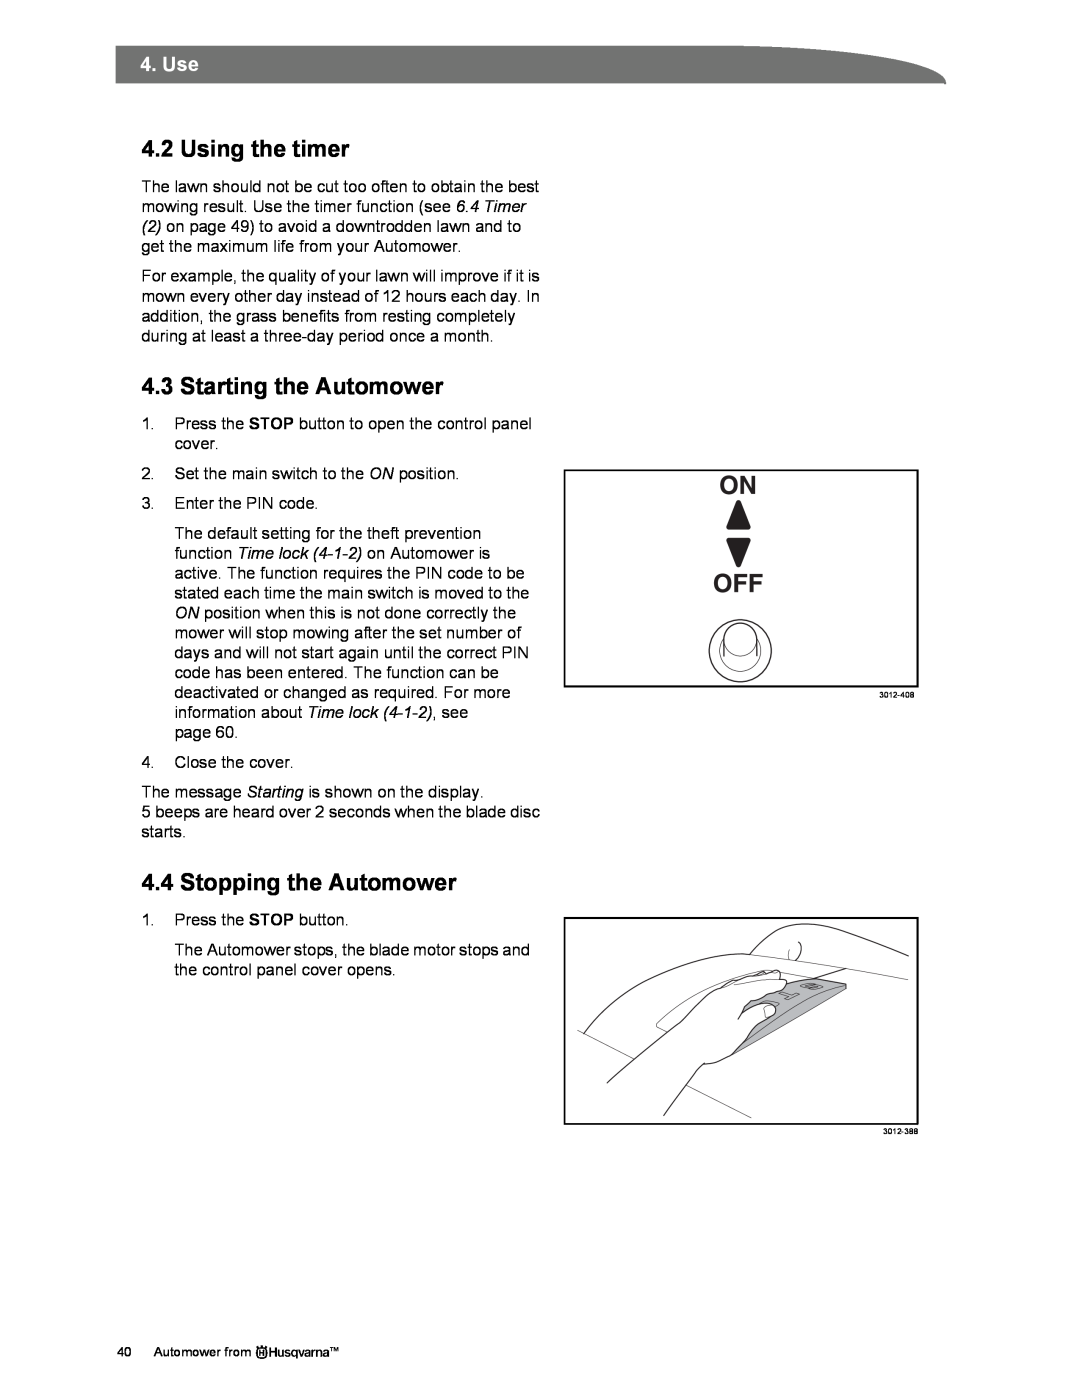 Husqvarna manual 4.2Using the timer, Starting the Automower, Stopping the Automower, 4.Use 